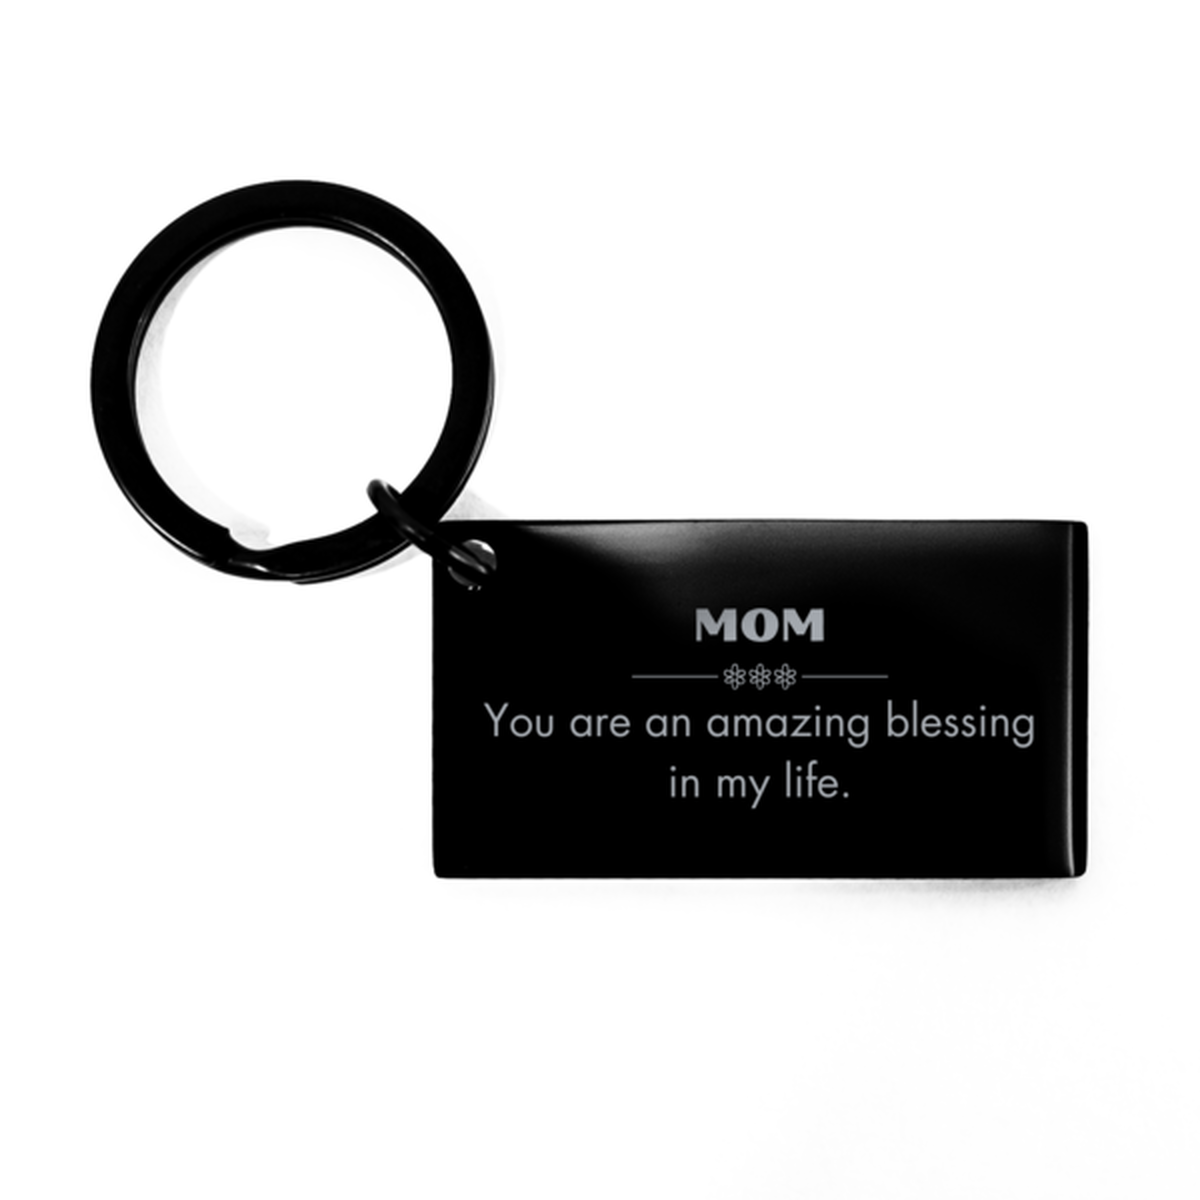 Mom Keychain, You are an amazing blessing in my life, Thank You Gifts For Mom, Inspirational Birthday Christmas Unique Gifts For Mom